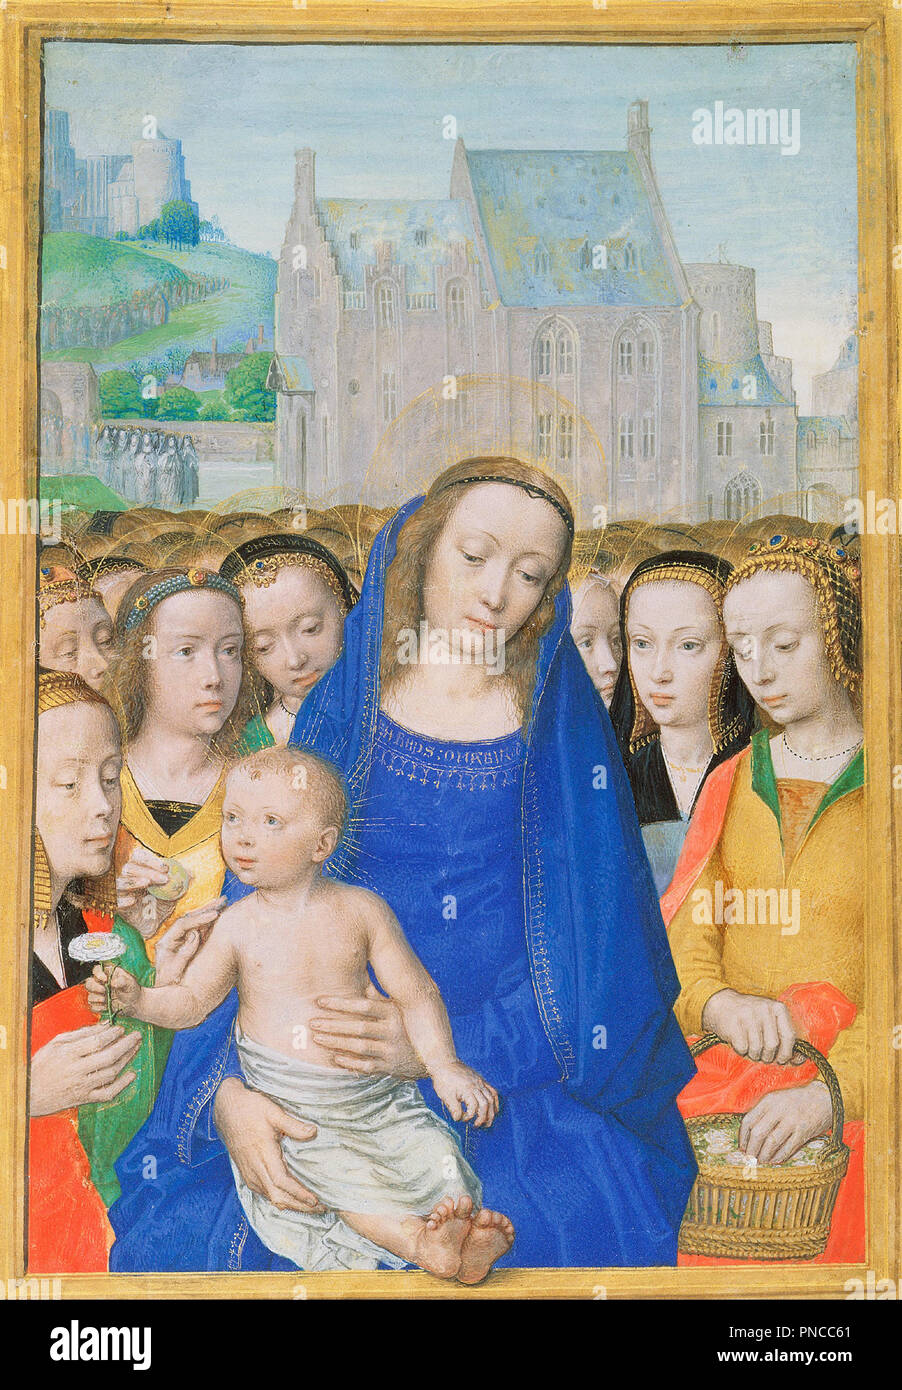 Virgin and Child with Female Saints. Date/Period: 1500. Width: 133 mm. Height: 183 mm. Author: Gerard David. Stock Photo